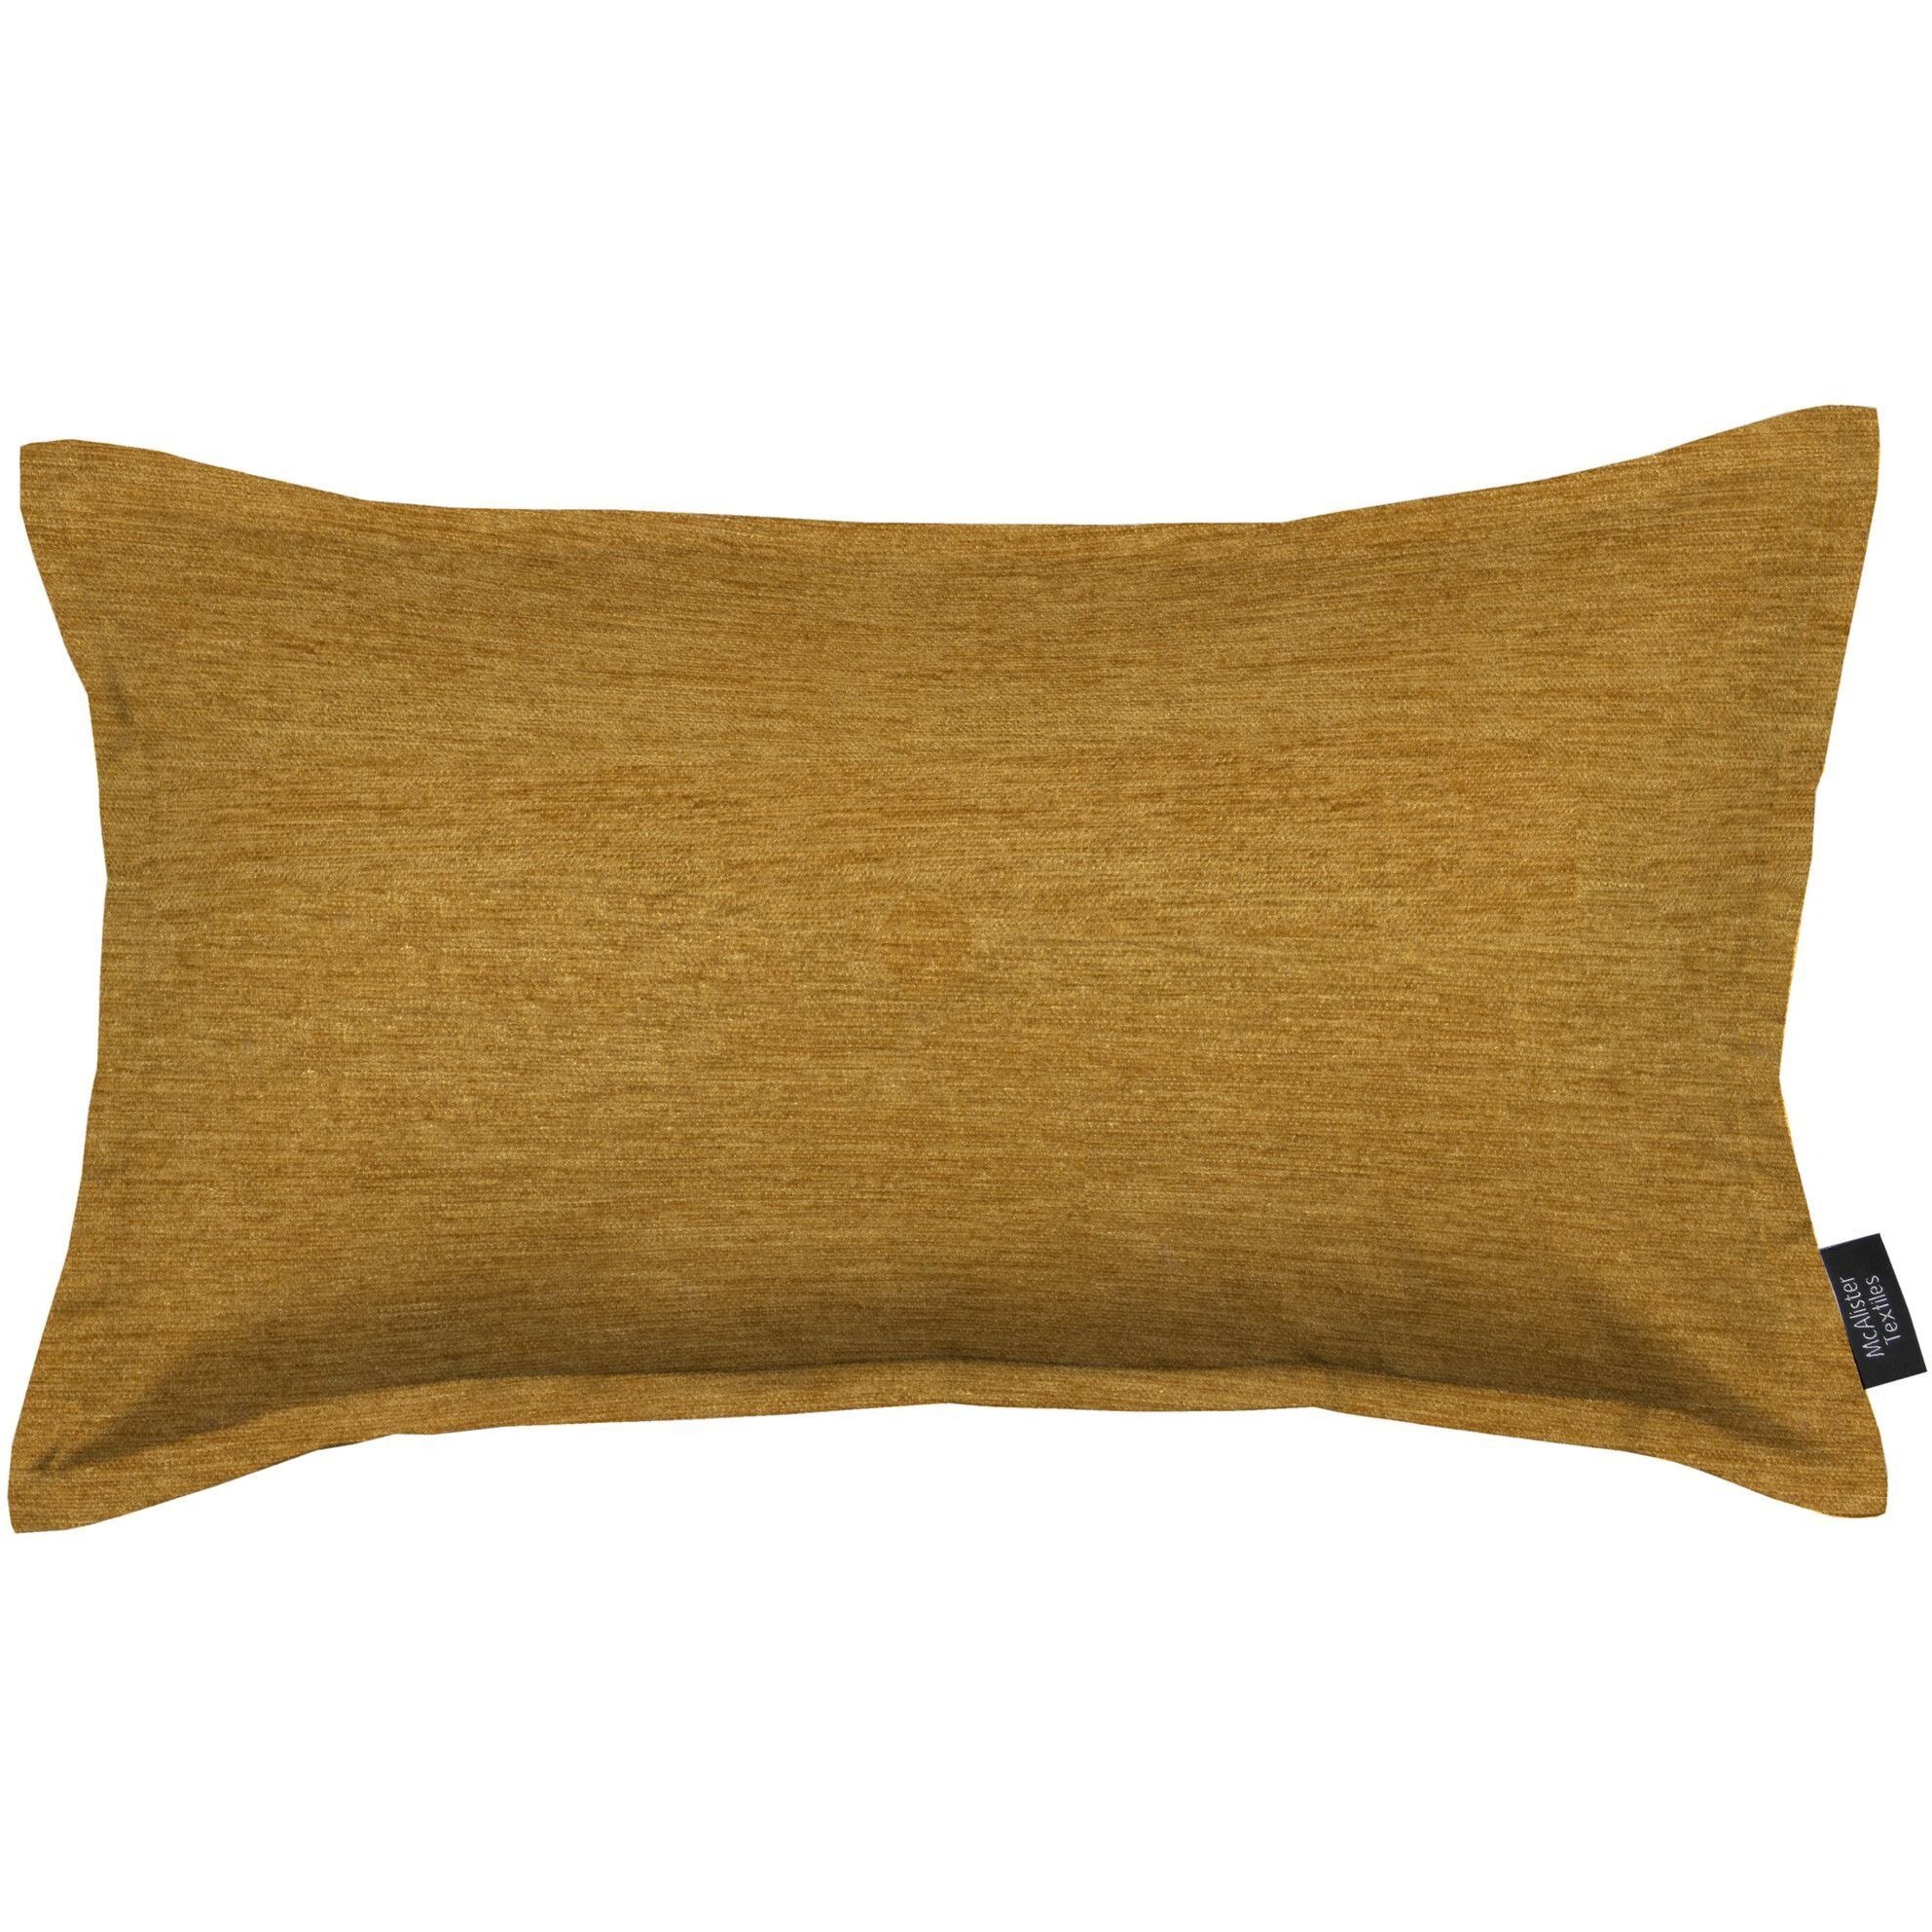 Plain Chenille Mustard Yellow Cushion, Cover Only / 50cm x 30cm